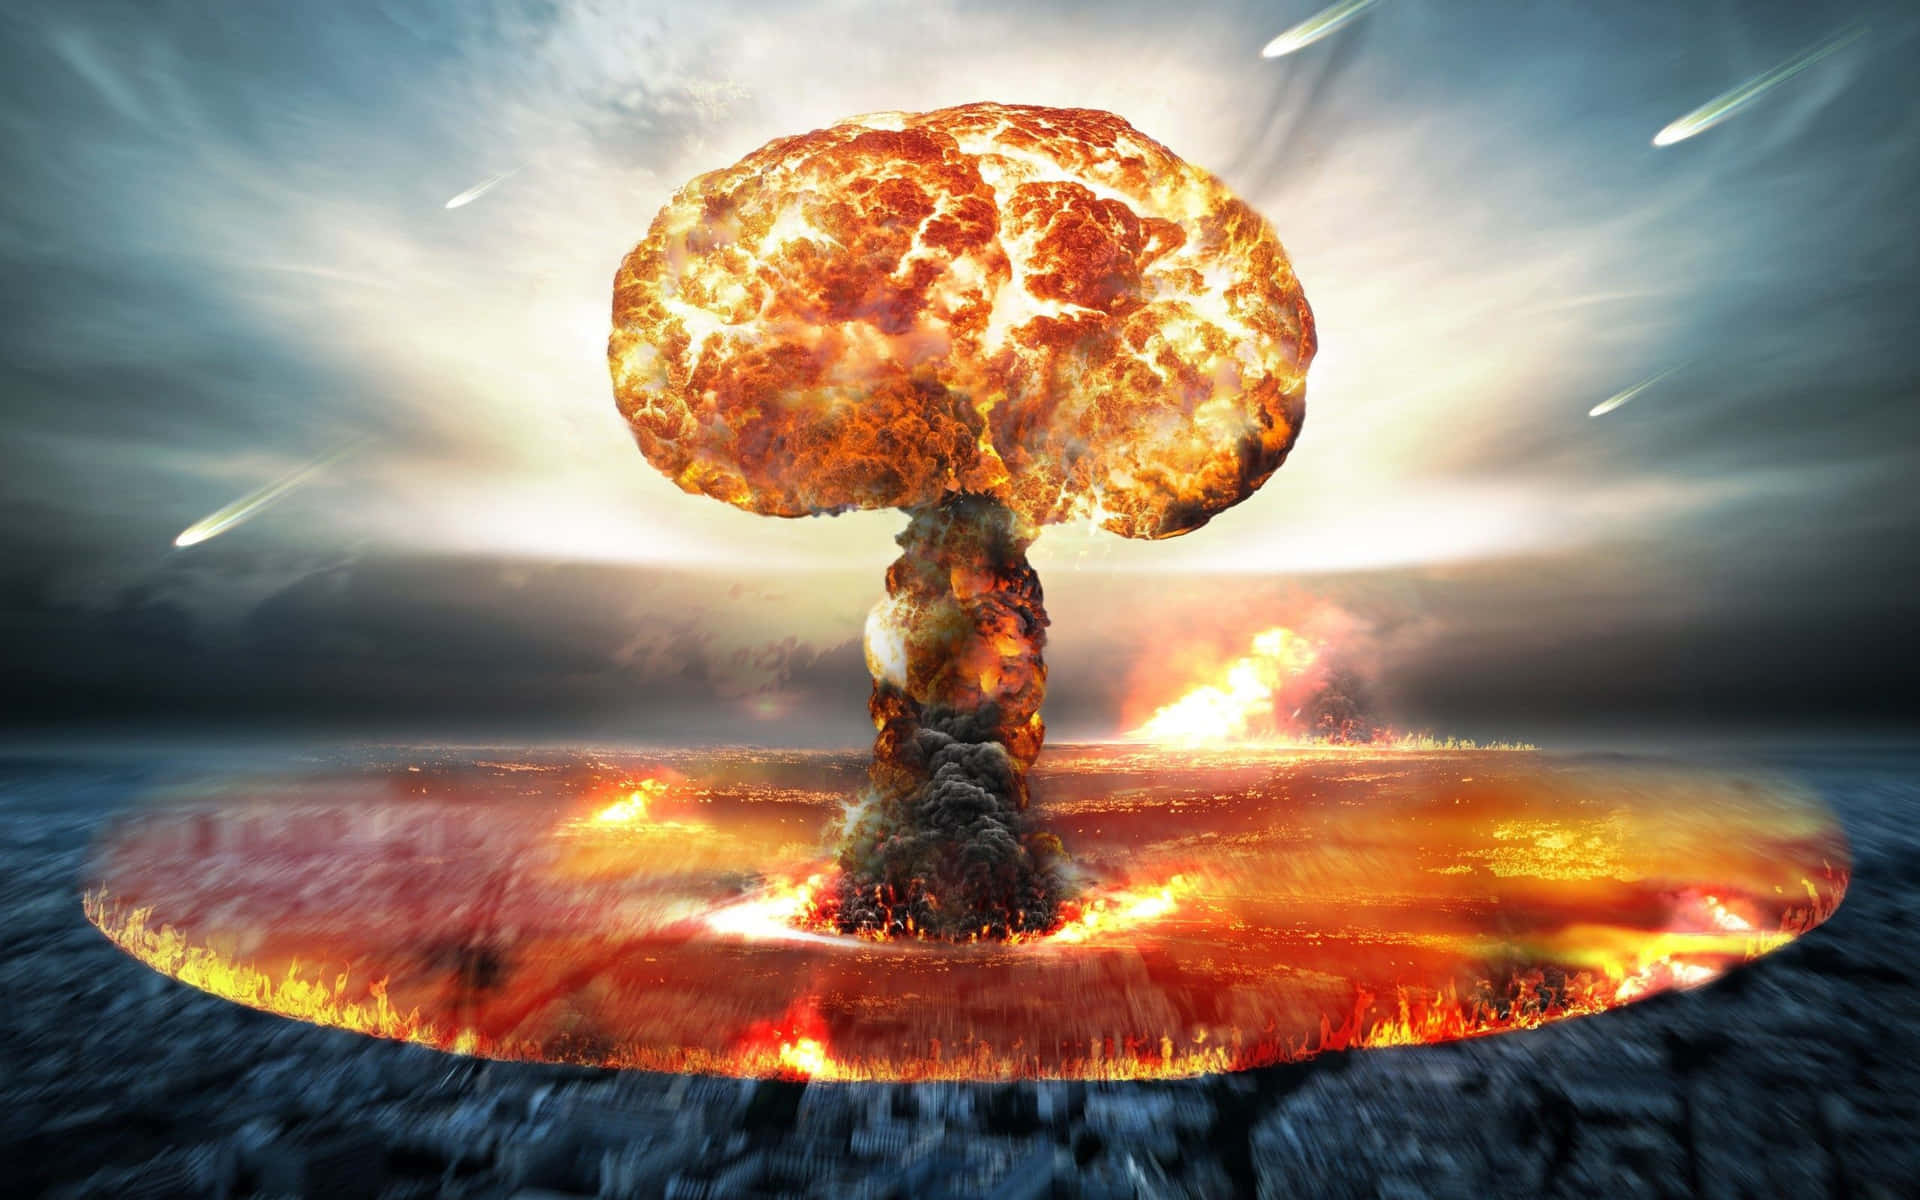 Fallout Nuke Explosion in a Post-Apocalyptic Wasteland Wallpaper